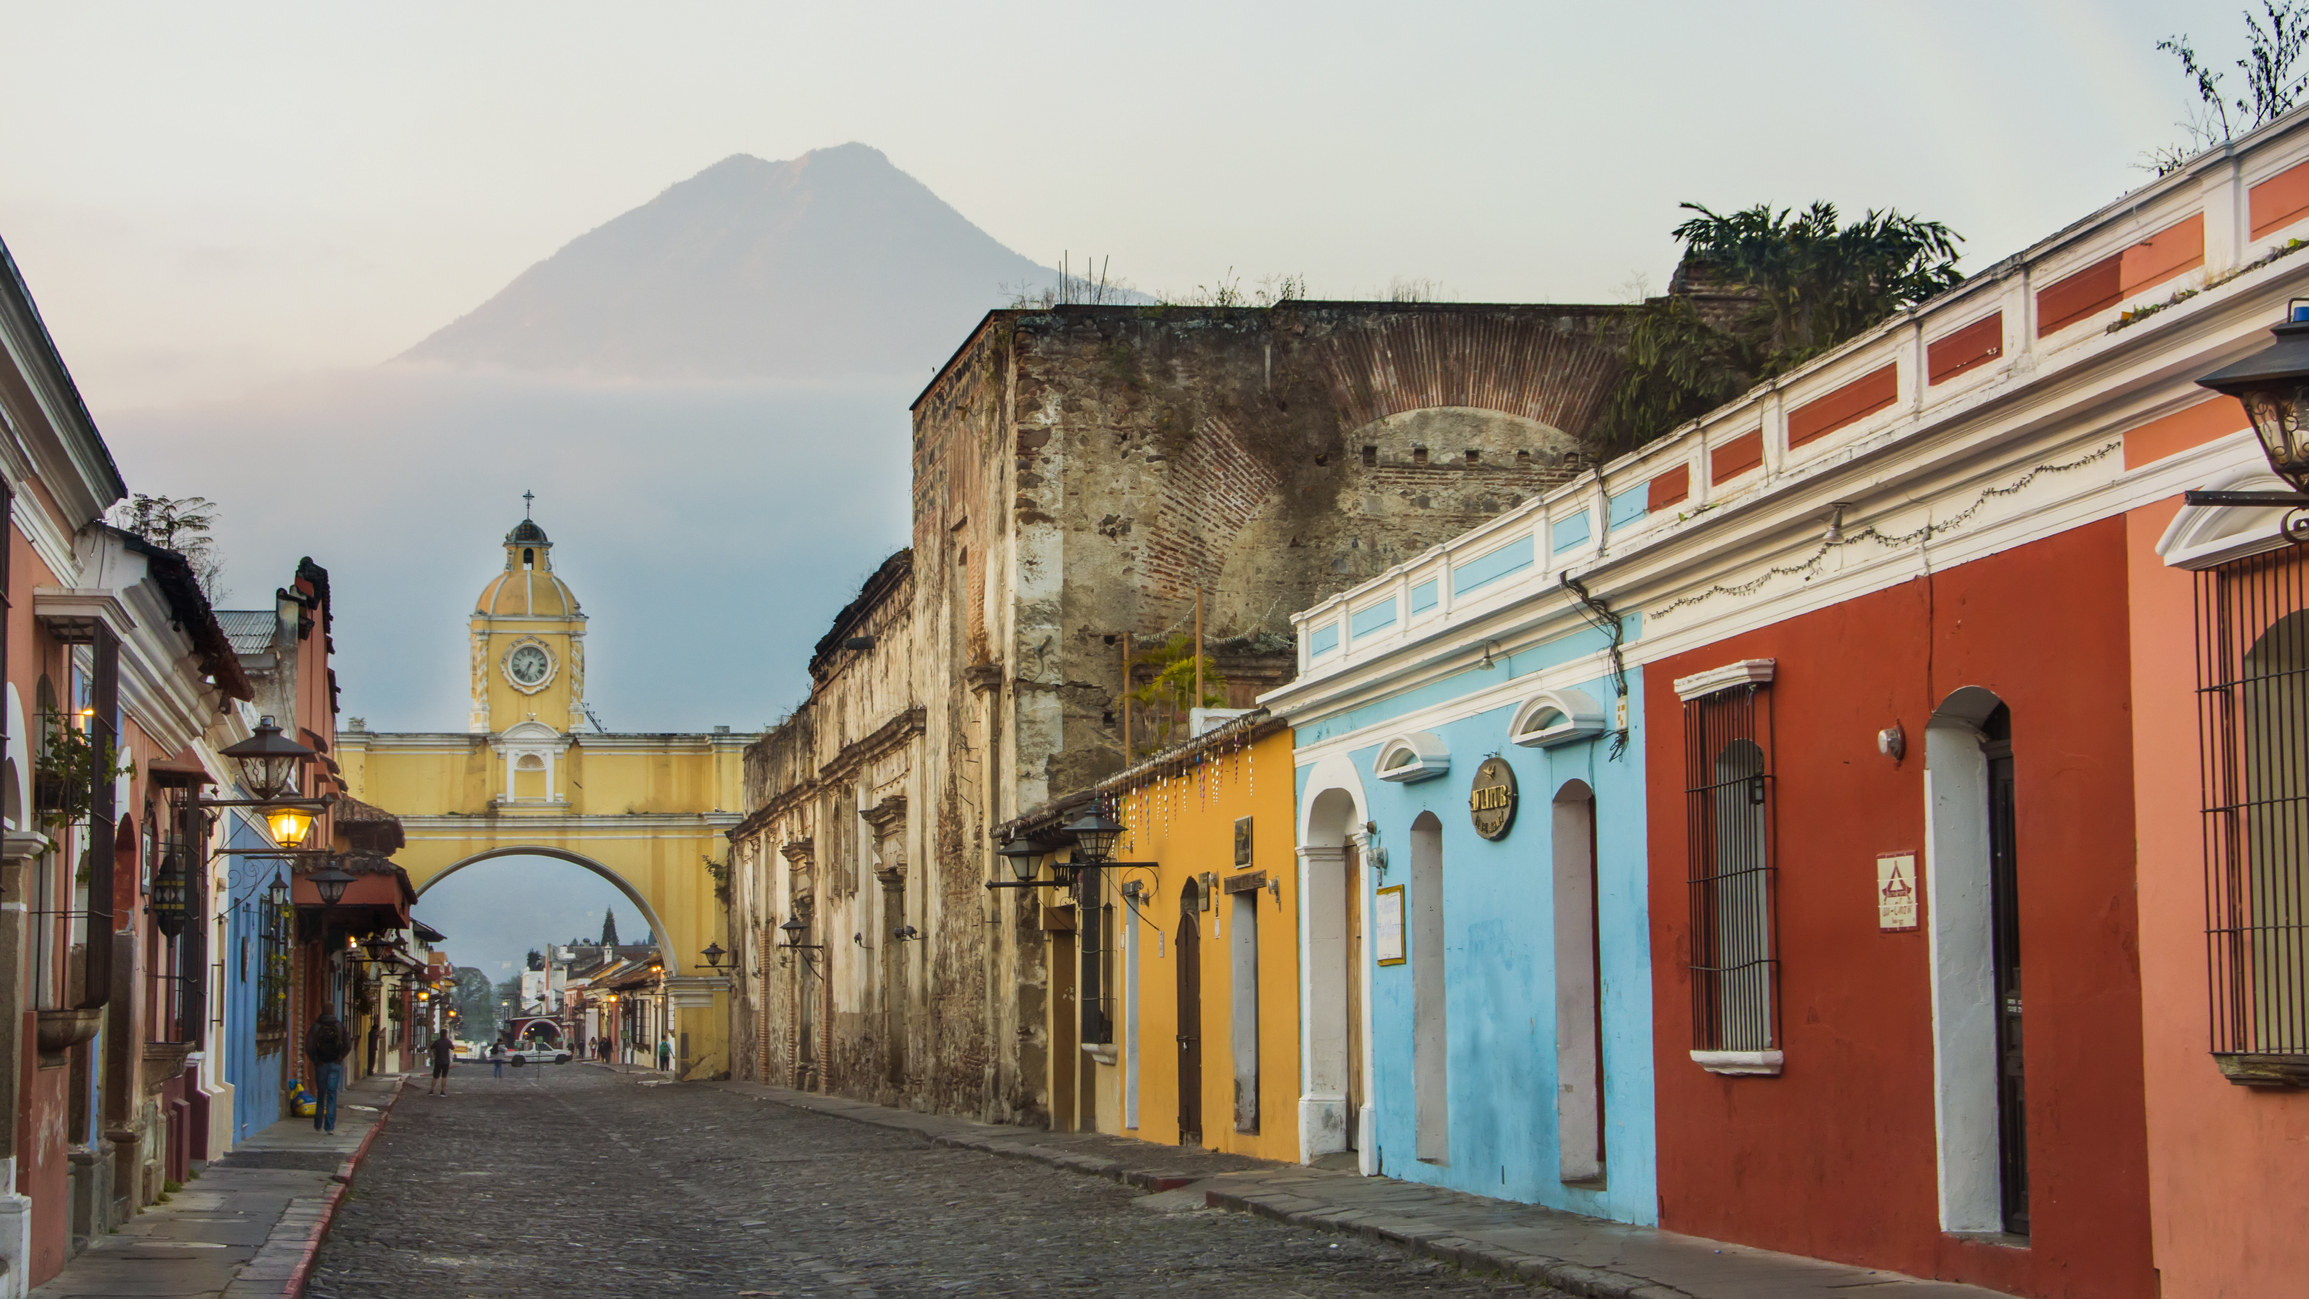 Colorful buildings and a mountain in the backdrop of Antigua Guatemala.